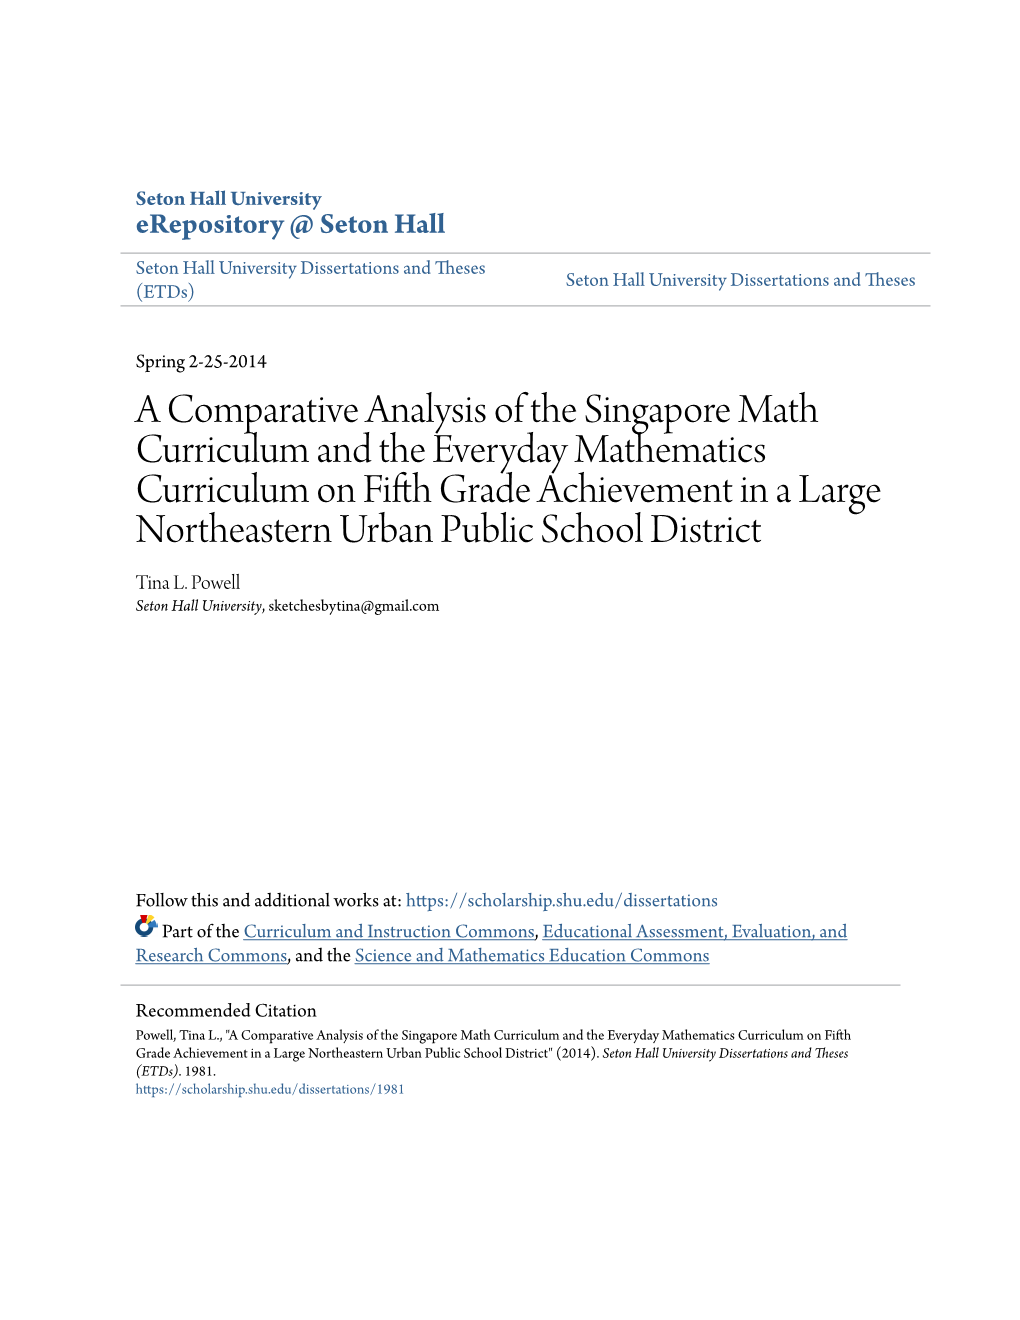 A Comparative Analysis of the Singapore Math Curriculum and The